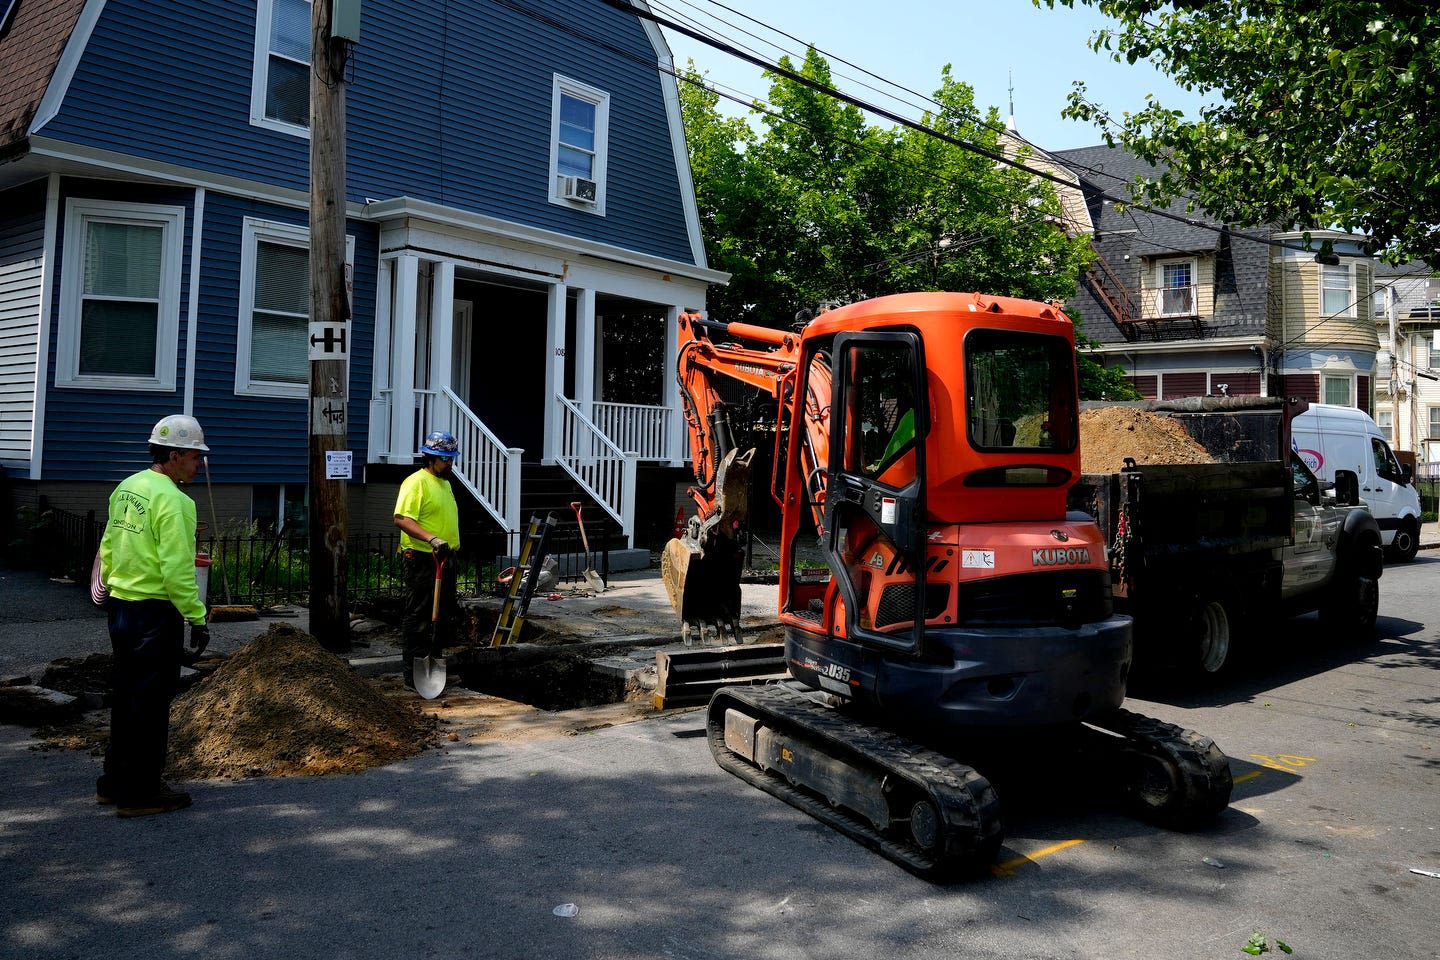 US government sends $26.3M for lead-pipe replacement in RI. Here's where the money will go